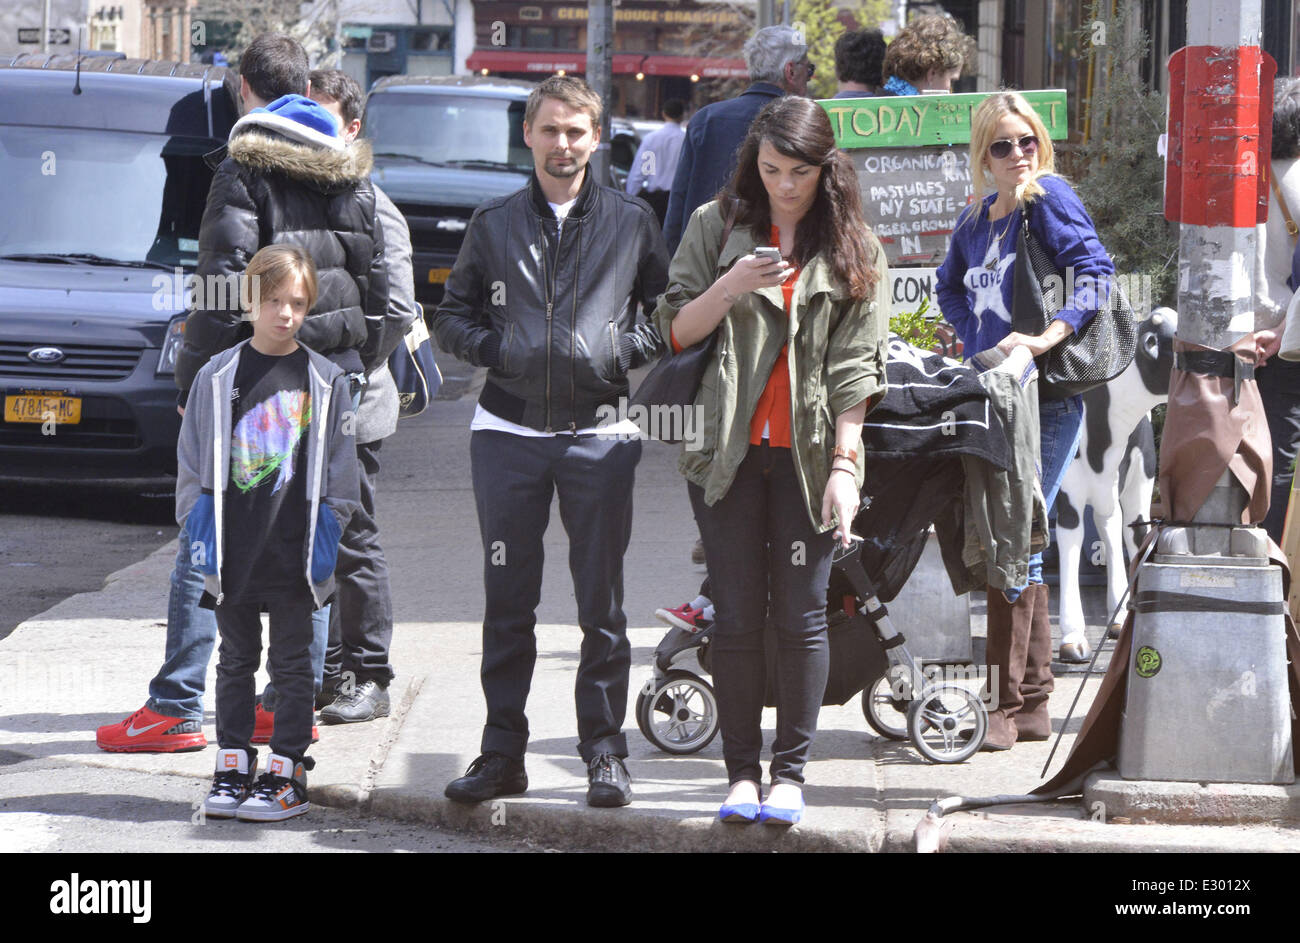 Kate Hudson takes her son Bingham Hawn Bellamy out in a stroller and head for lunch with family at Bubby's restaurant in Manhattan  Featuring: Kate Hudson,Matt Bellamy,Bingham Bellamy,Ryder Robinson Where: New York City, NY, United States When: 17 Apr 201 Stock Photo